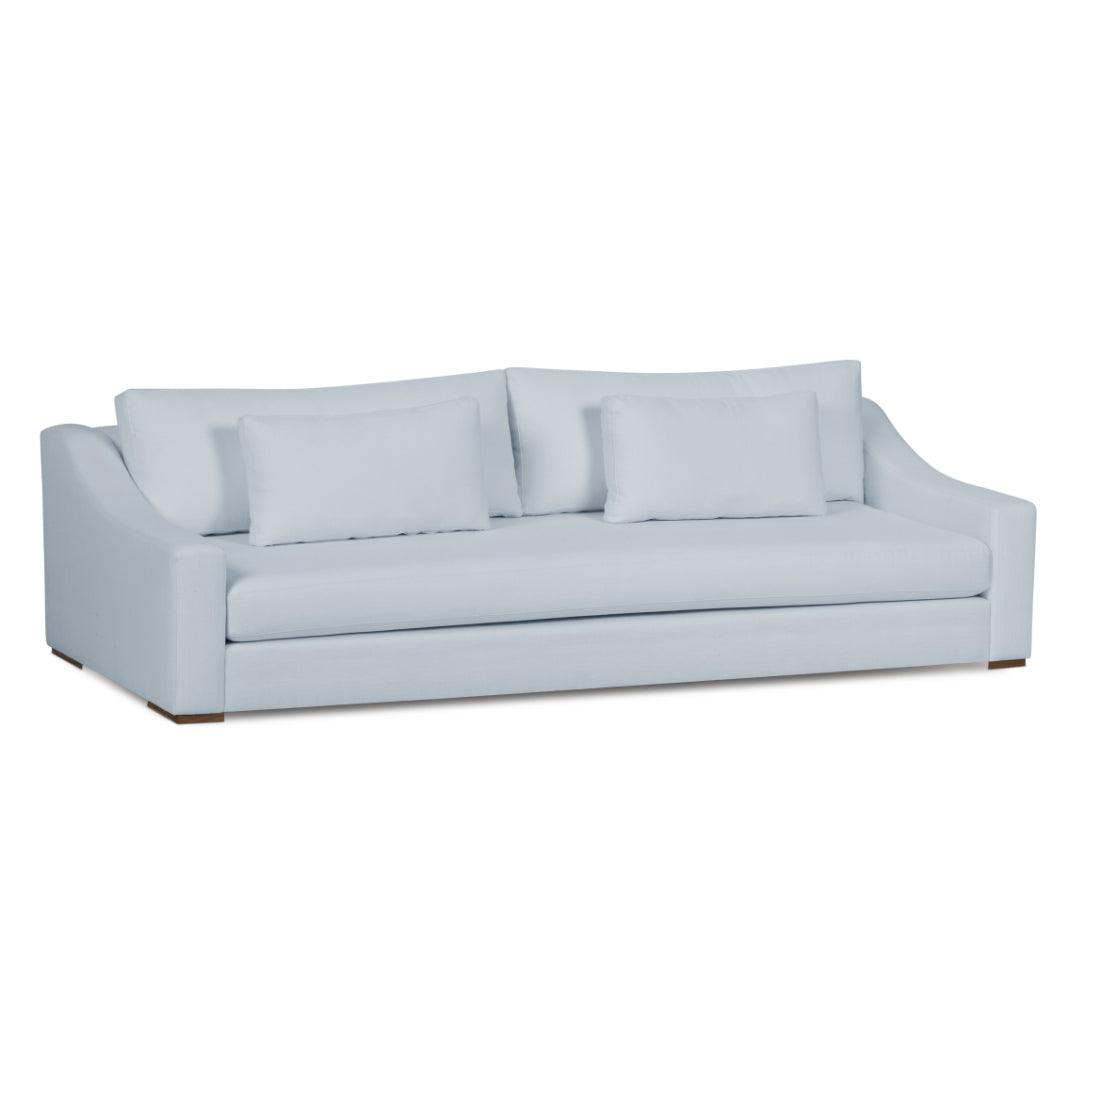 Hilary Handcrafted Sustainable Stain Reistant Sofa - Uptown Sebastian